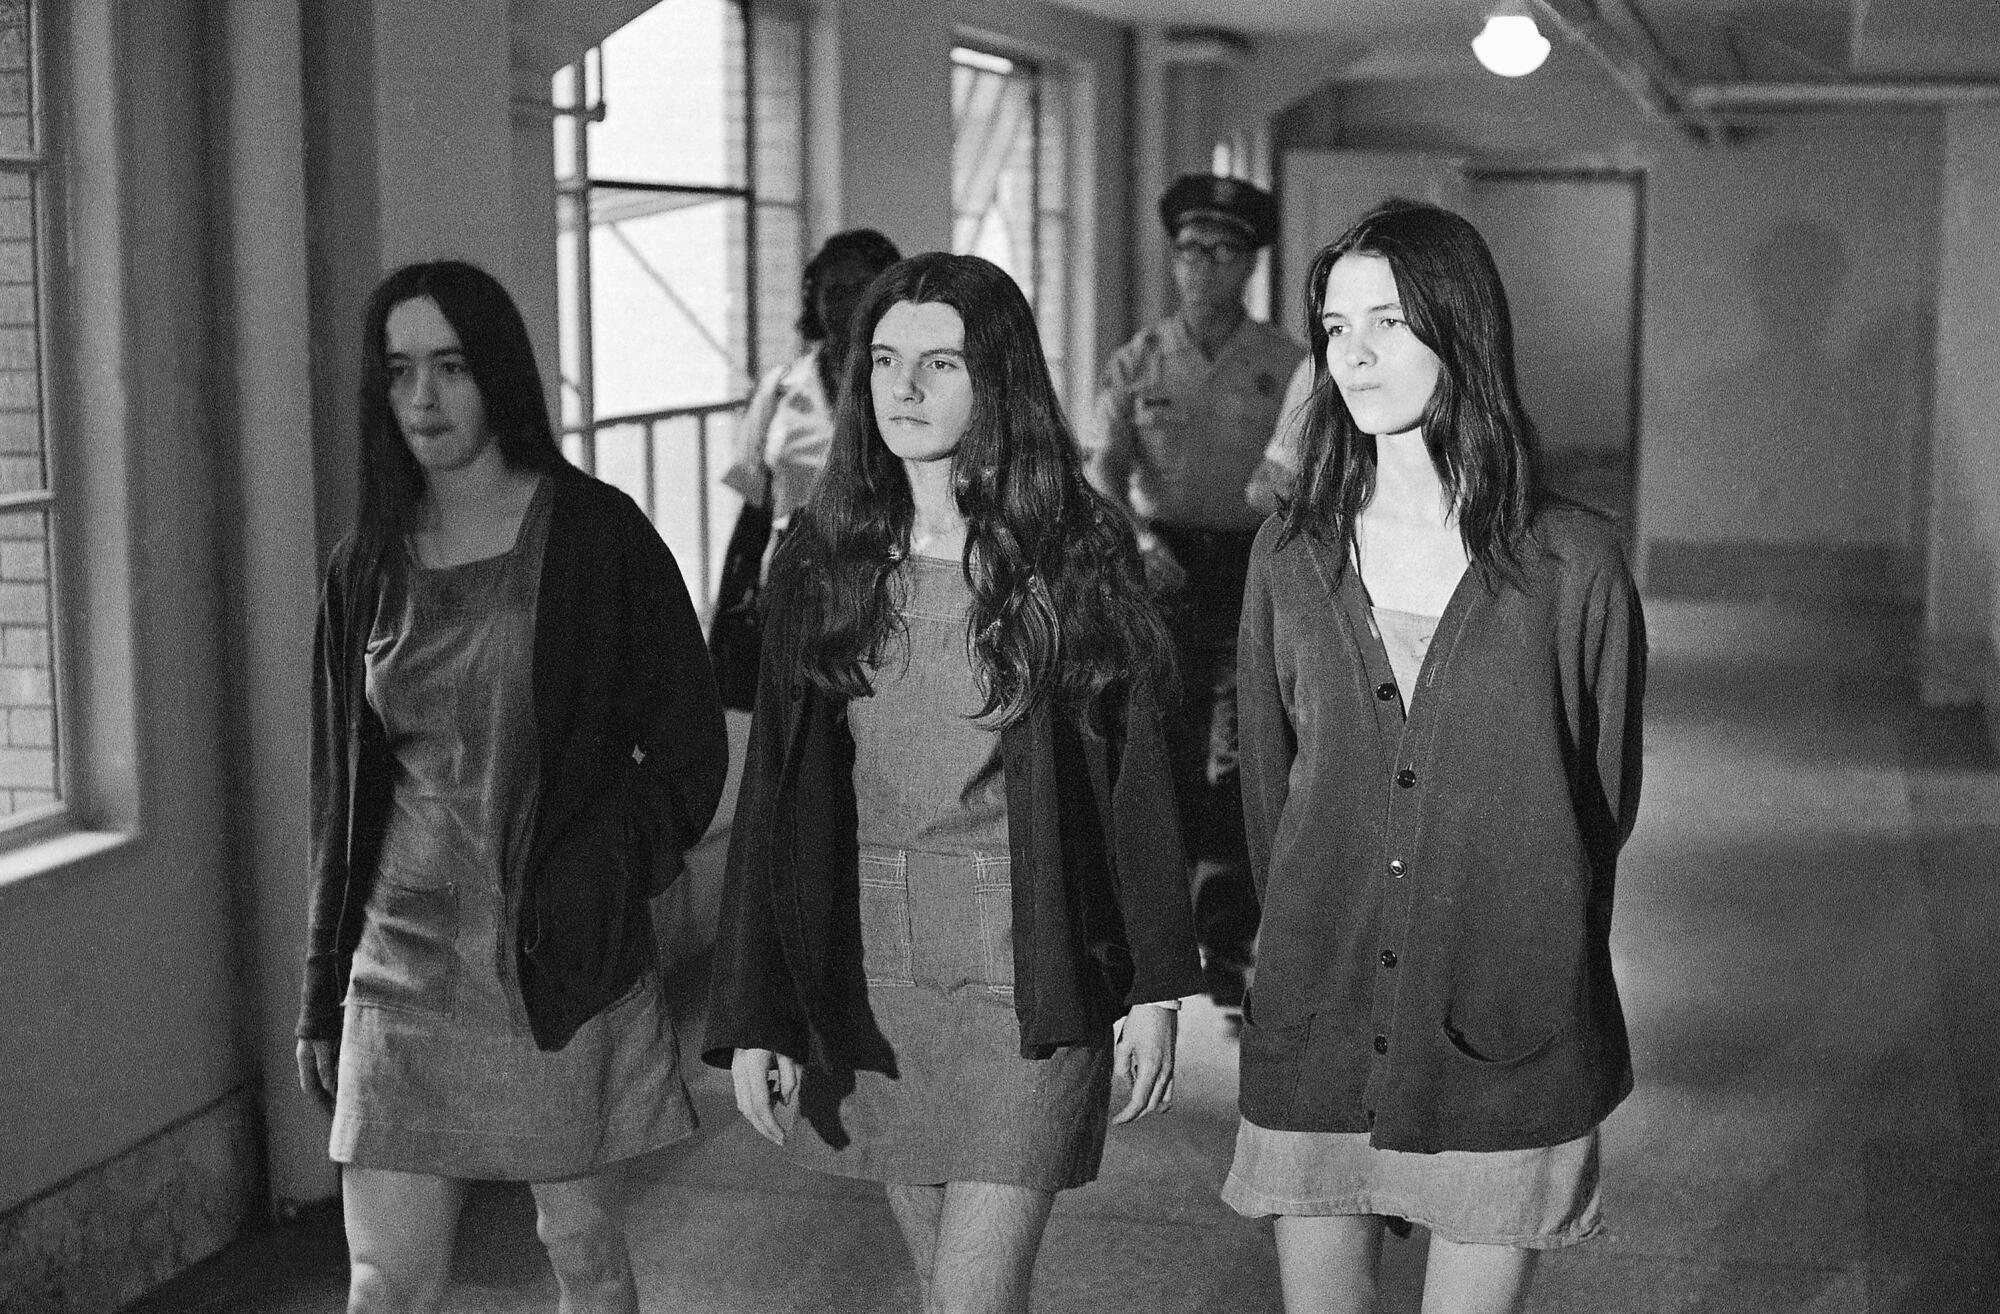 Three women walk down a hallway, with two guards behind them.